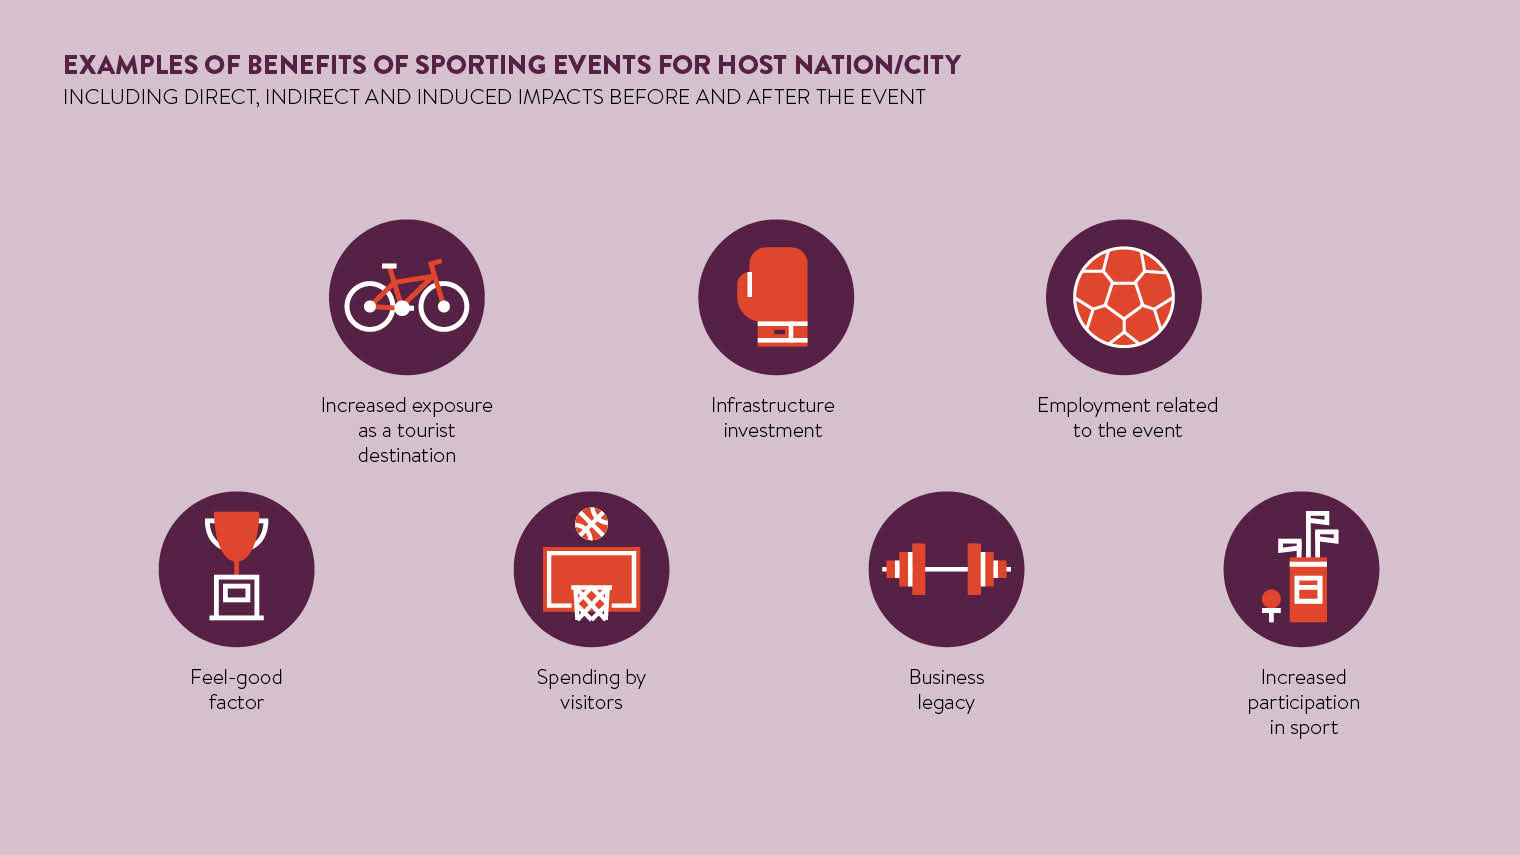 Benefits of hosting sporting events